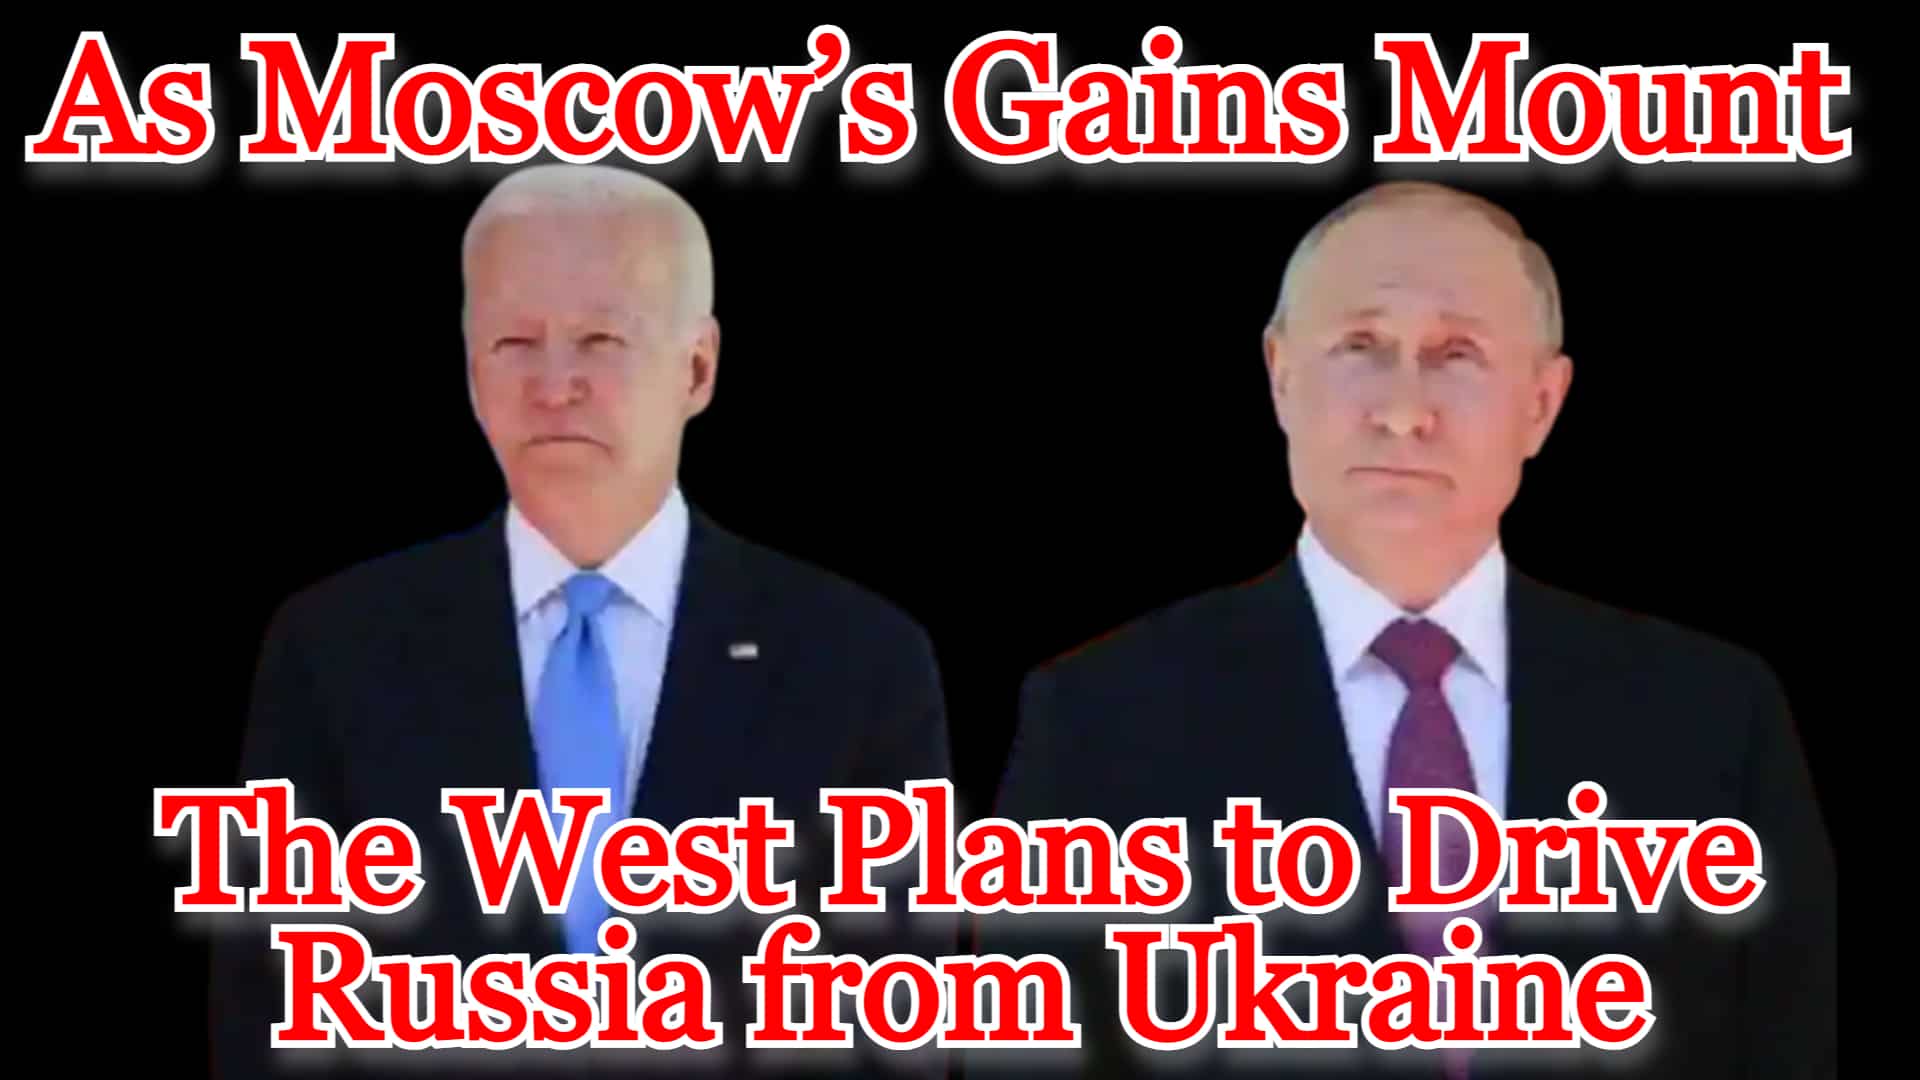 COI #284: As Moscow’s Gains Mount, The West Plans to Drive Russia from Ukraine